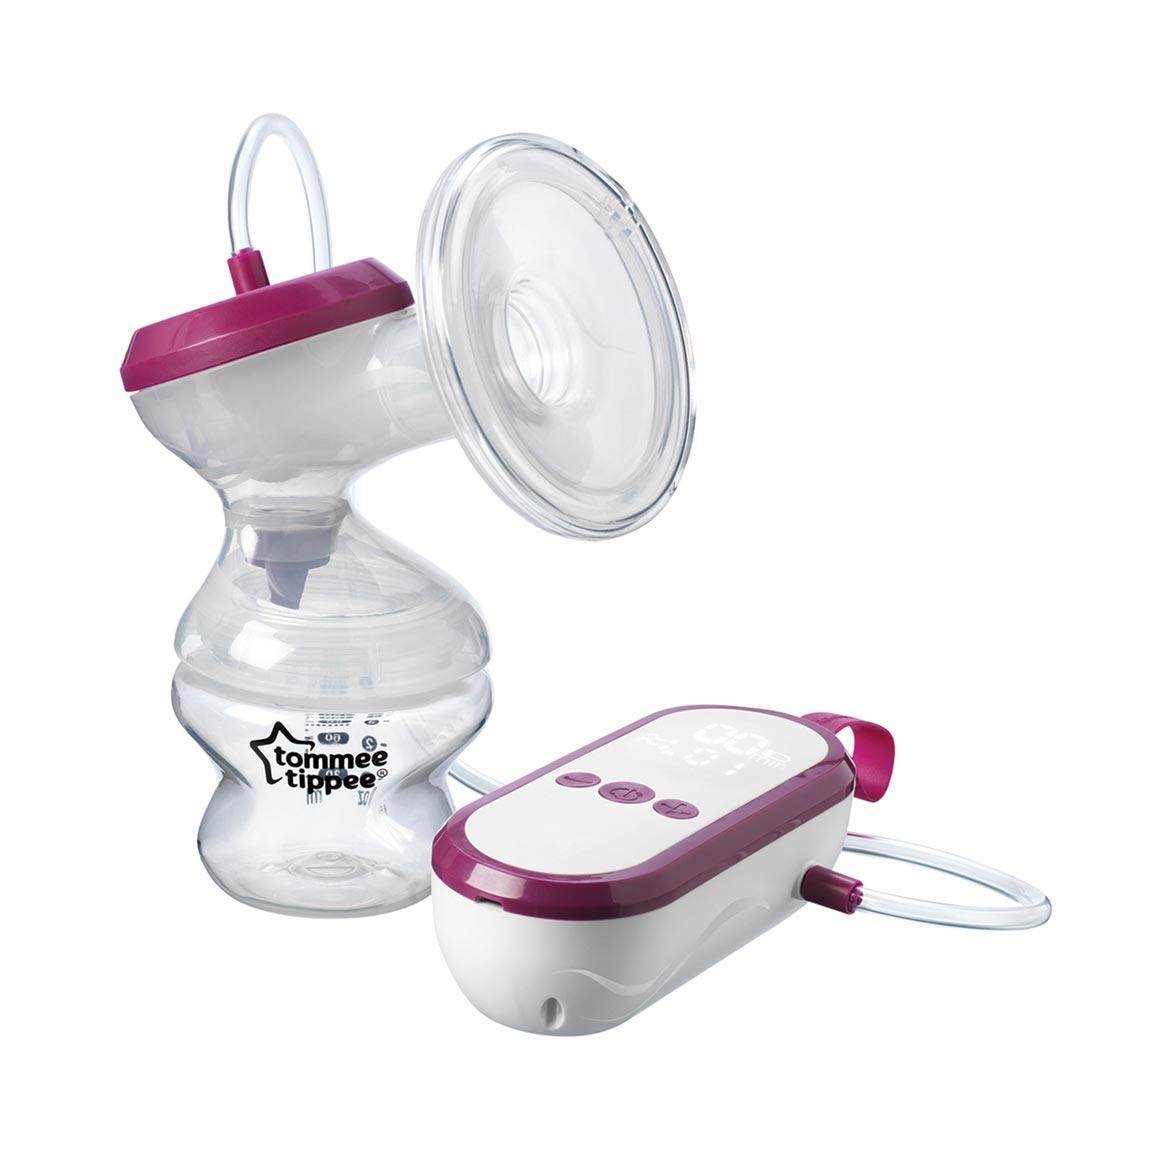 Tommee Tippee Made for Me Double Electric Wearable Breast Pump a  Hands-Free, in-Bra Breastfeeding Pump which is Portable and Quiet, with 1  Massage and 8 Express Modes and 4 Hour Battery Life 